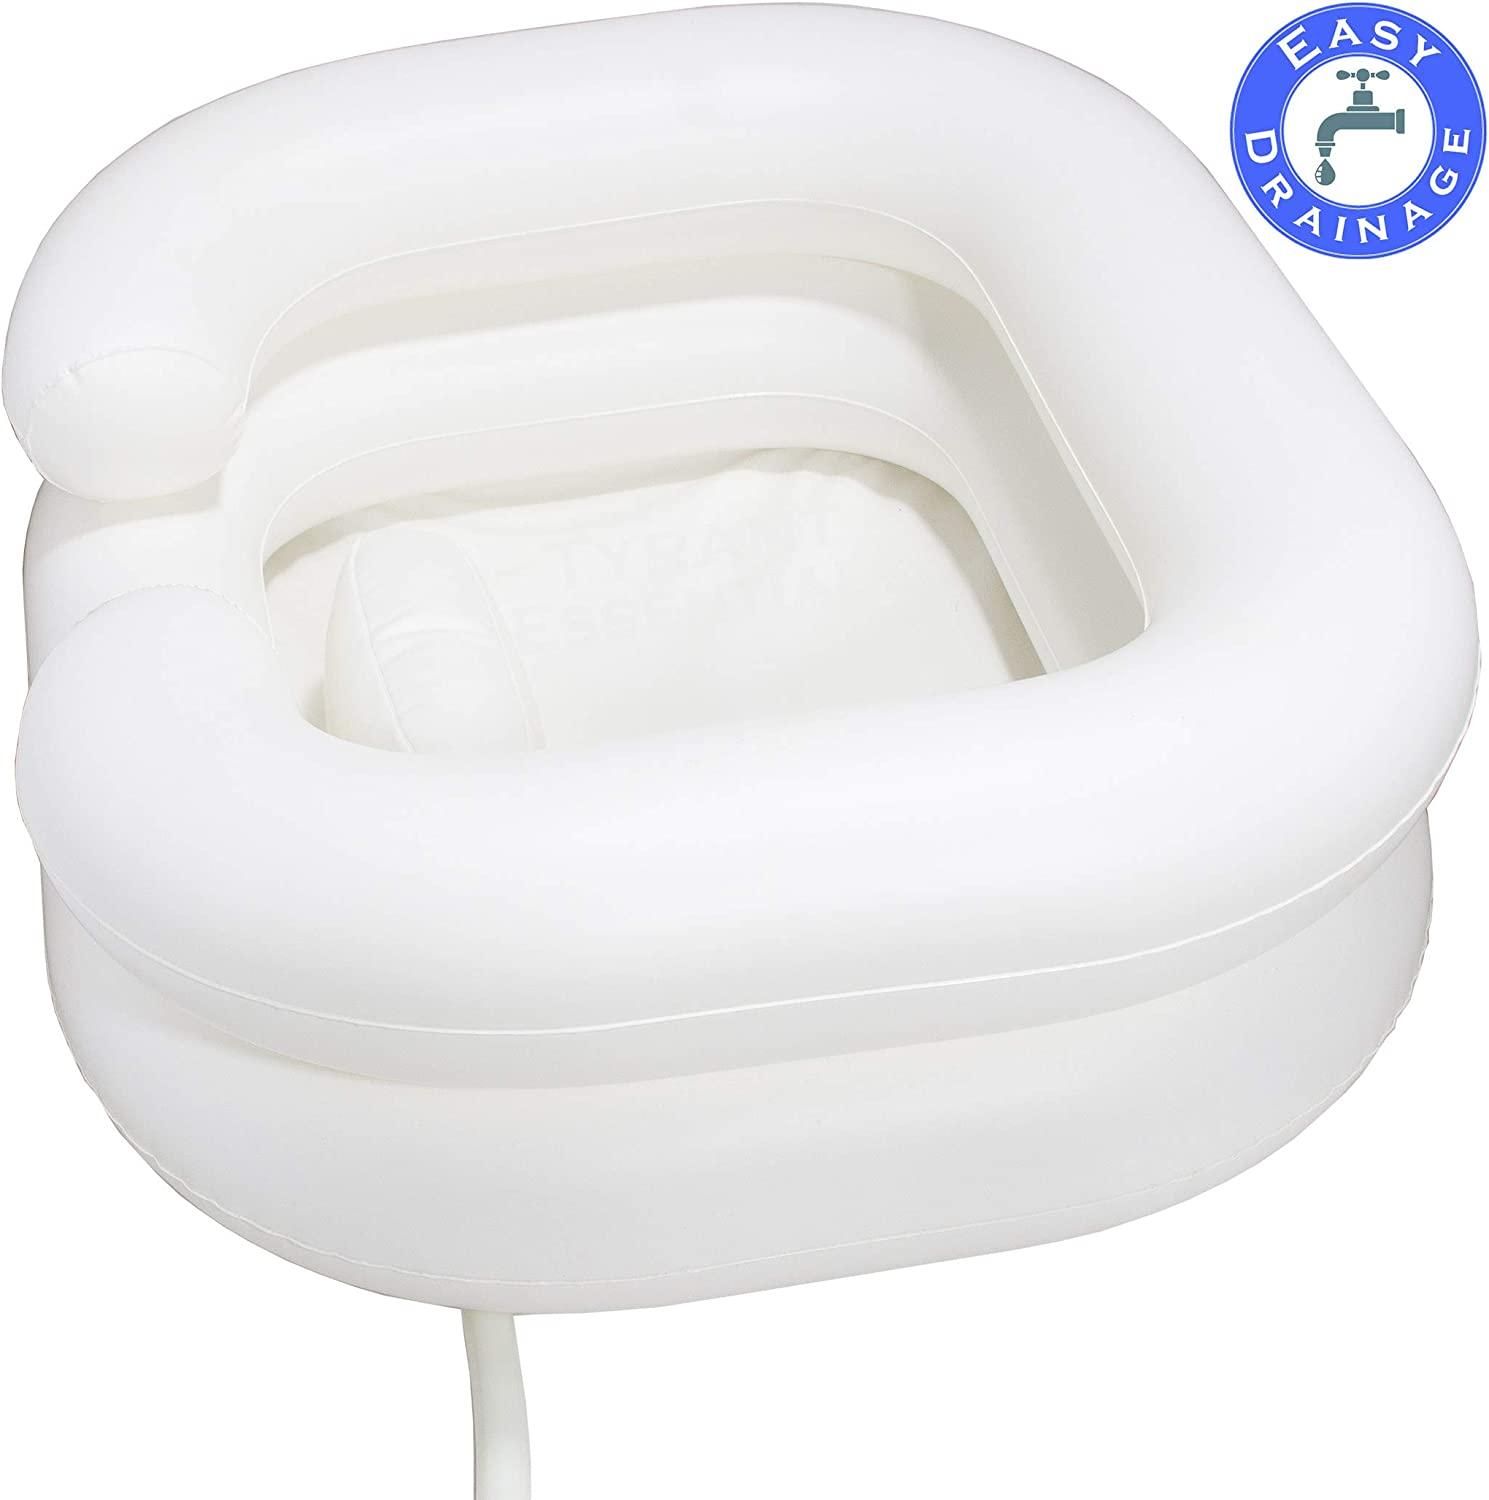 Inflatable Shampoo Basin with Pillow – in Bed Hair Wash Bowl for Bedridden,  Elderly Disabled and Loved Ones – Pillow for Extra Head & Neck Support with  No-Clog Easy Drainage